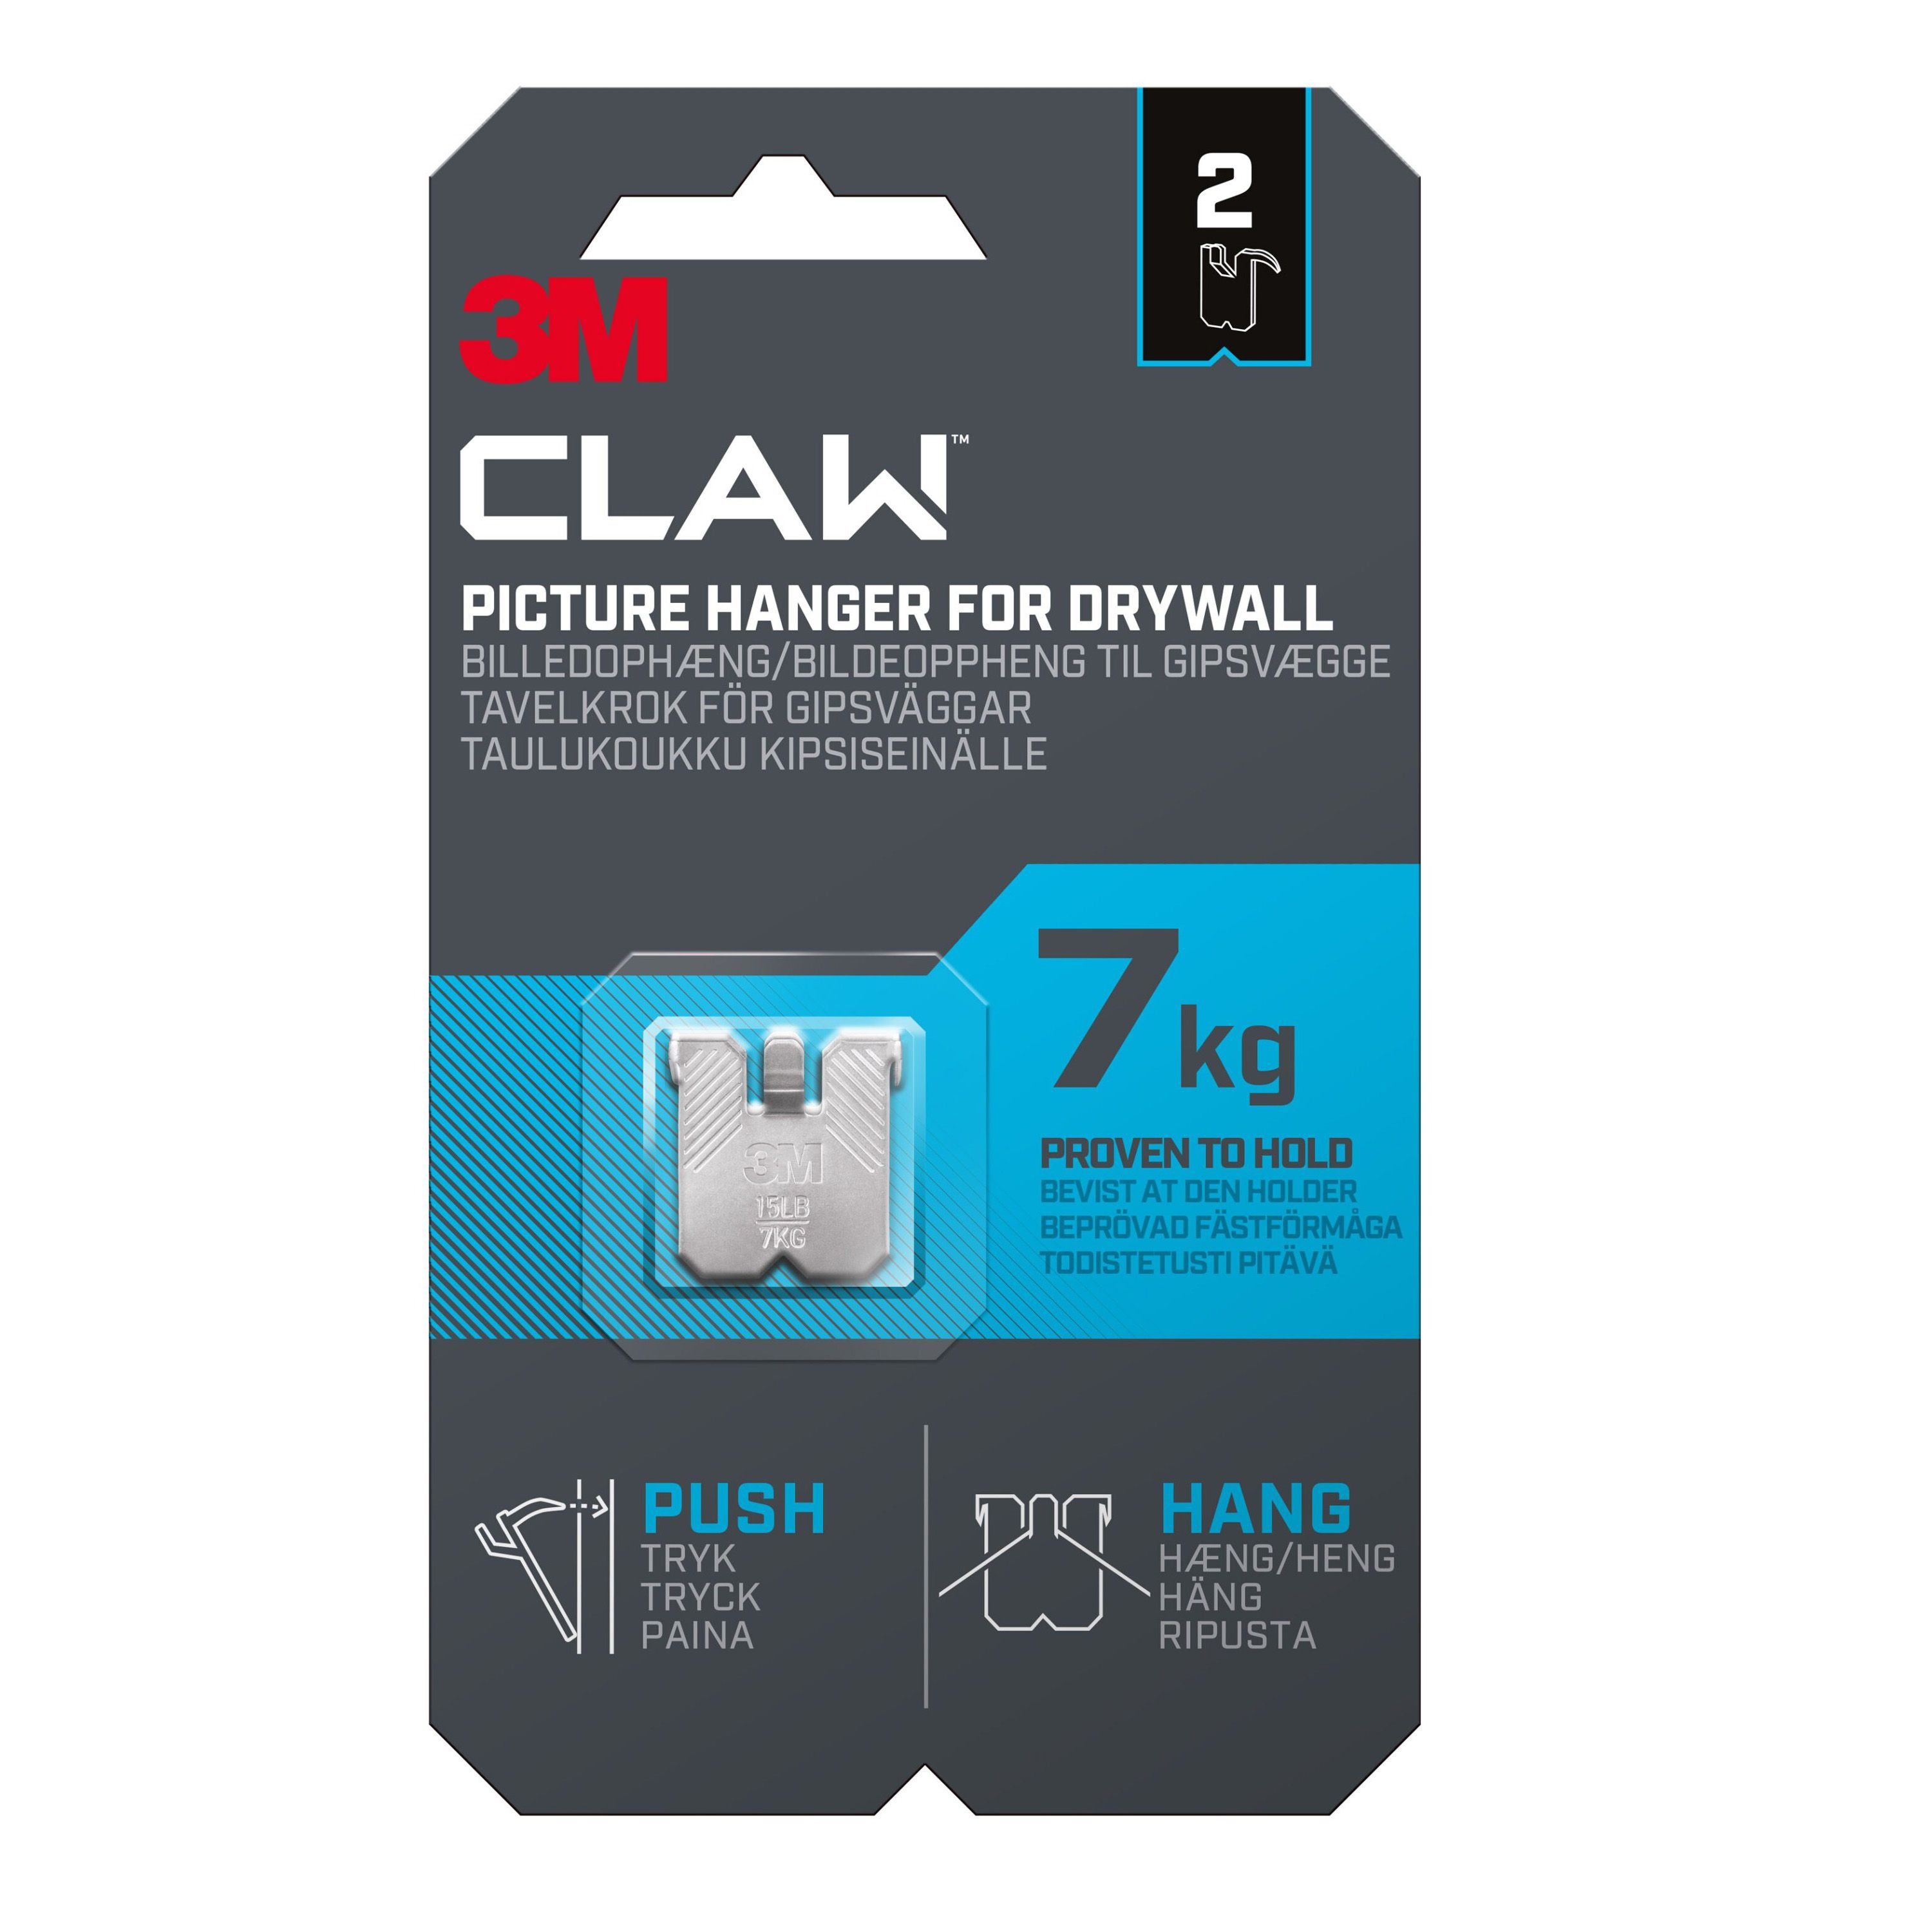 3M Claw Drywall Picture Hanger (H)23mm (W)23mm, Pack Of 2